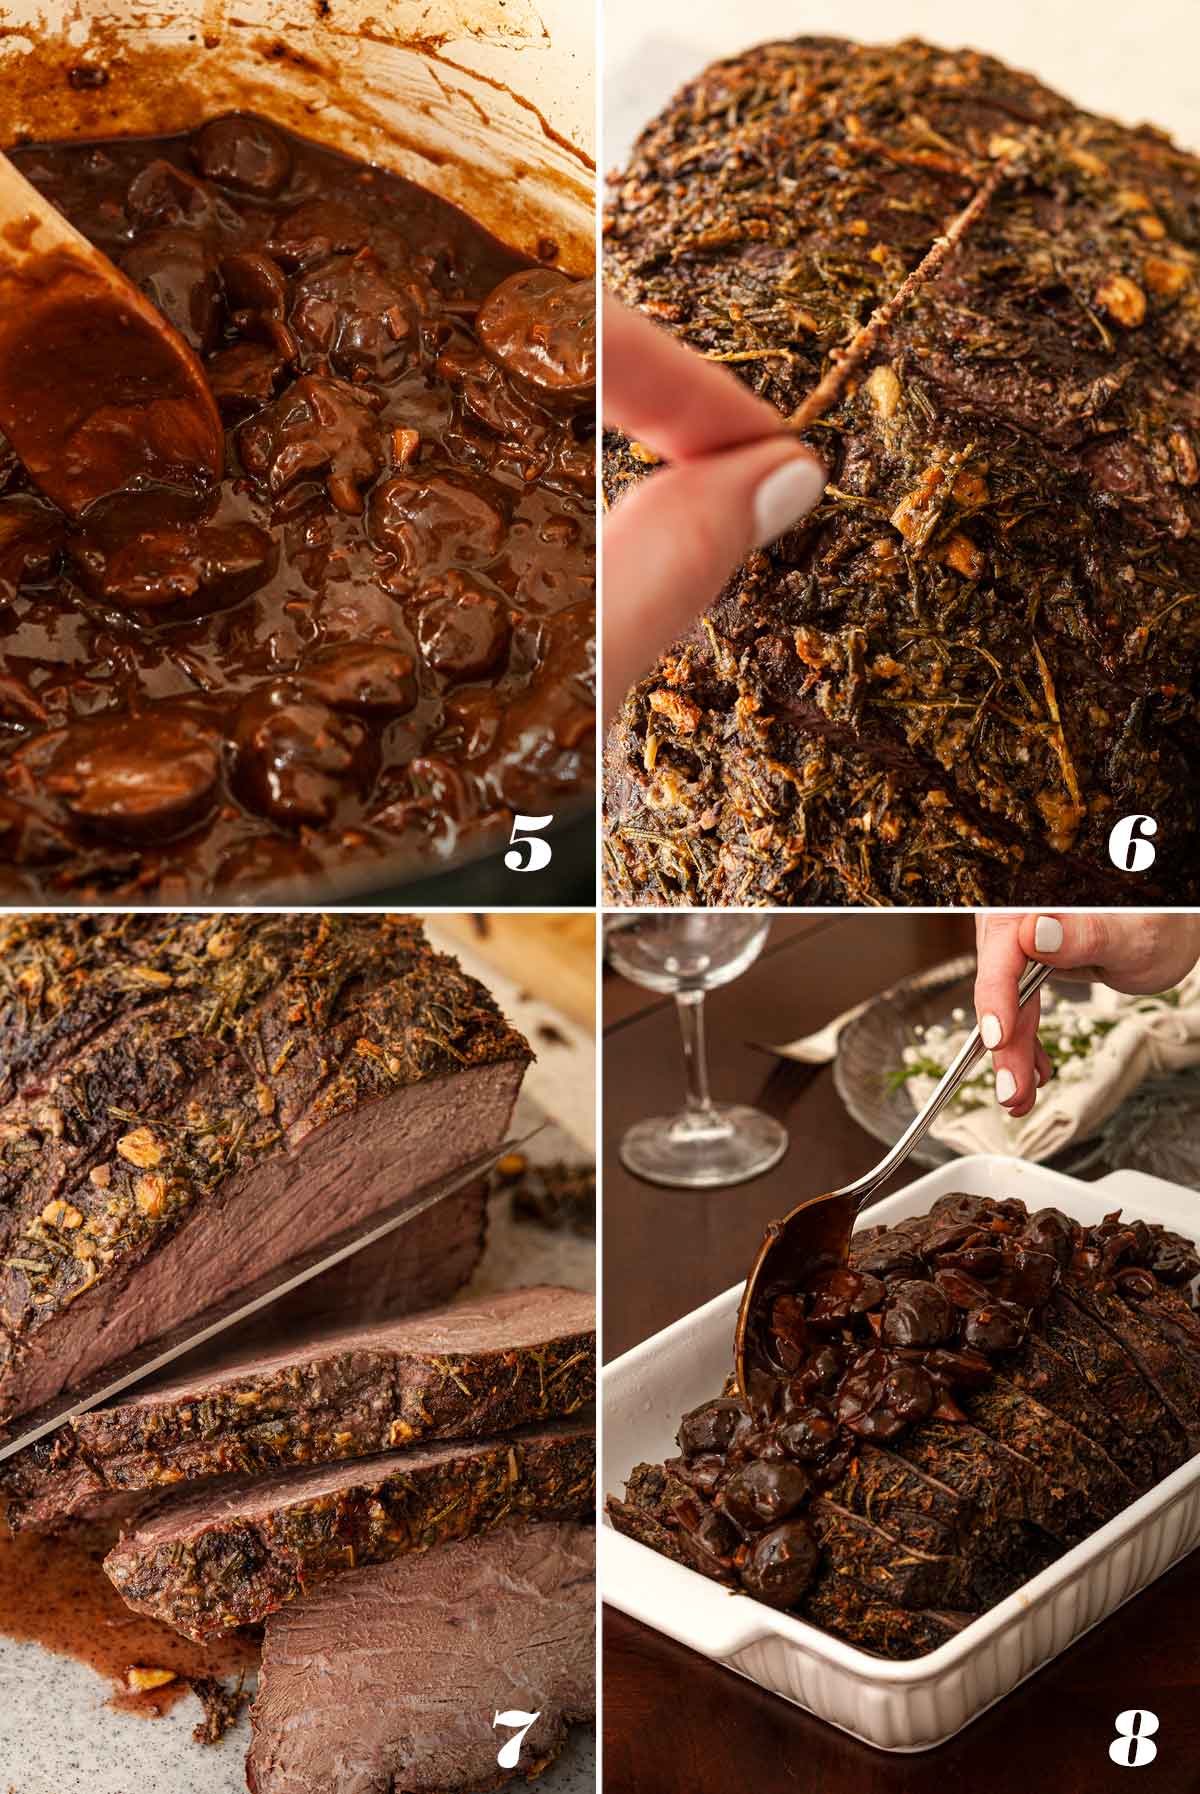 A collage of 4 numbered images showing how to prepare roast for serving.